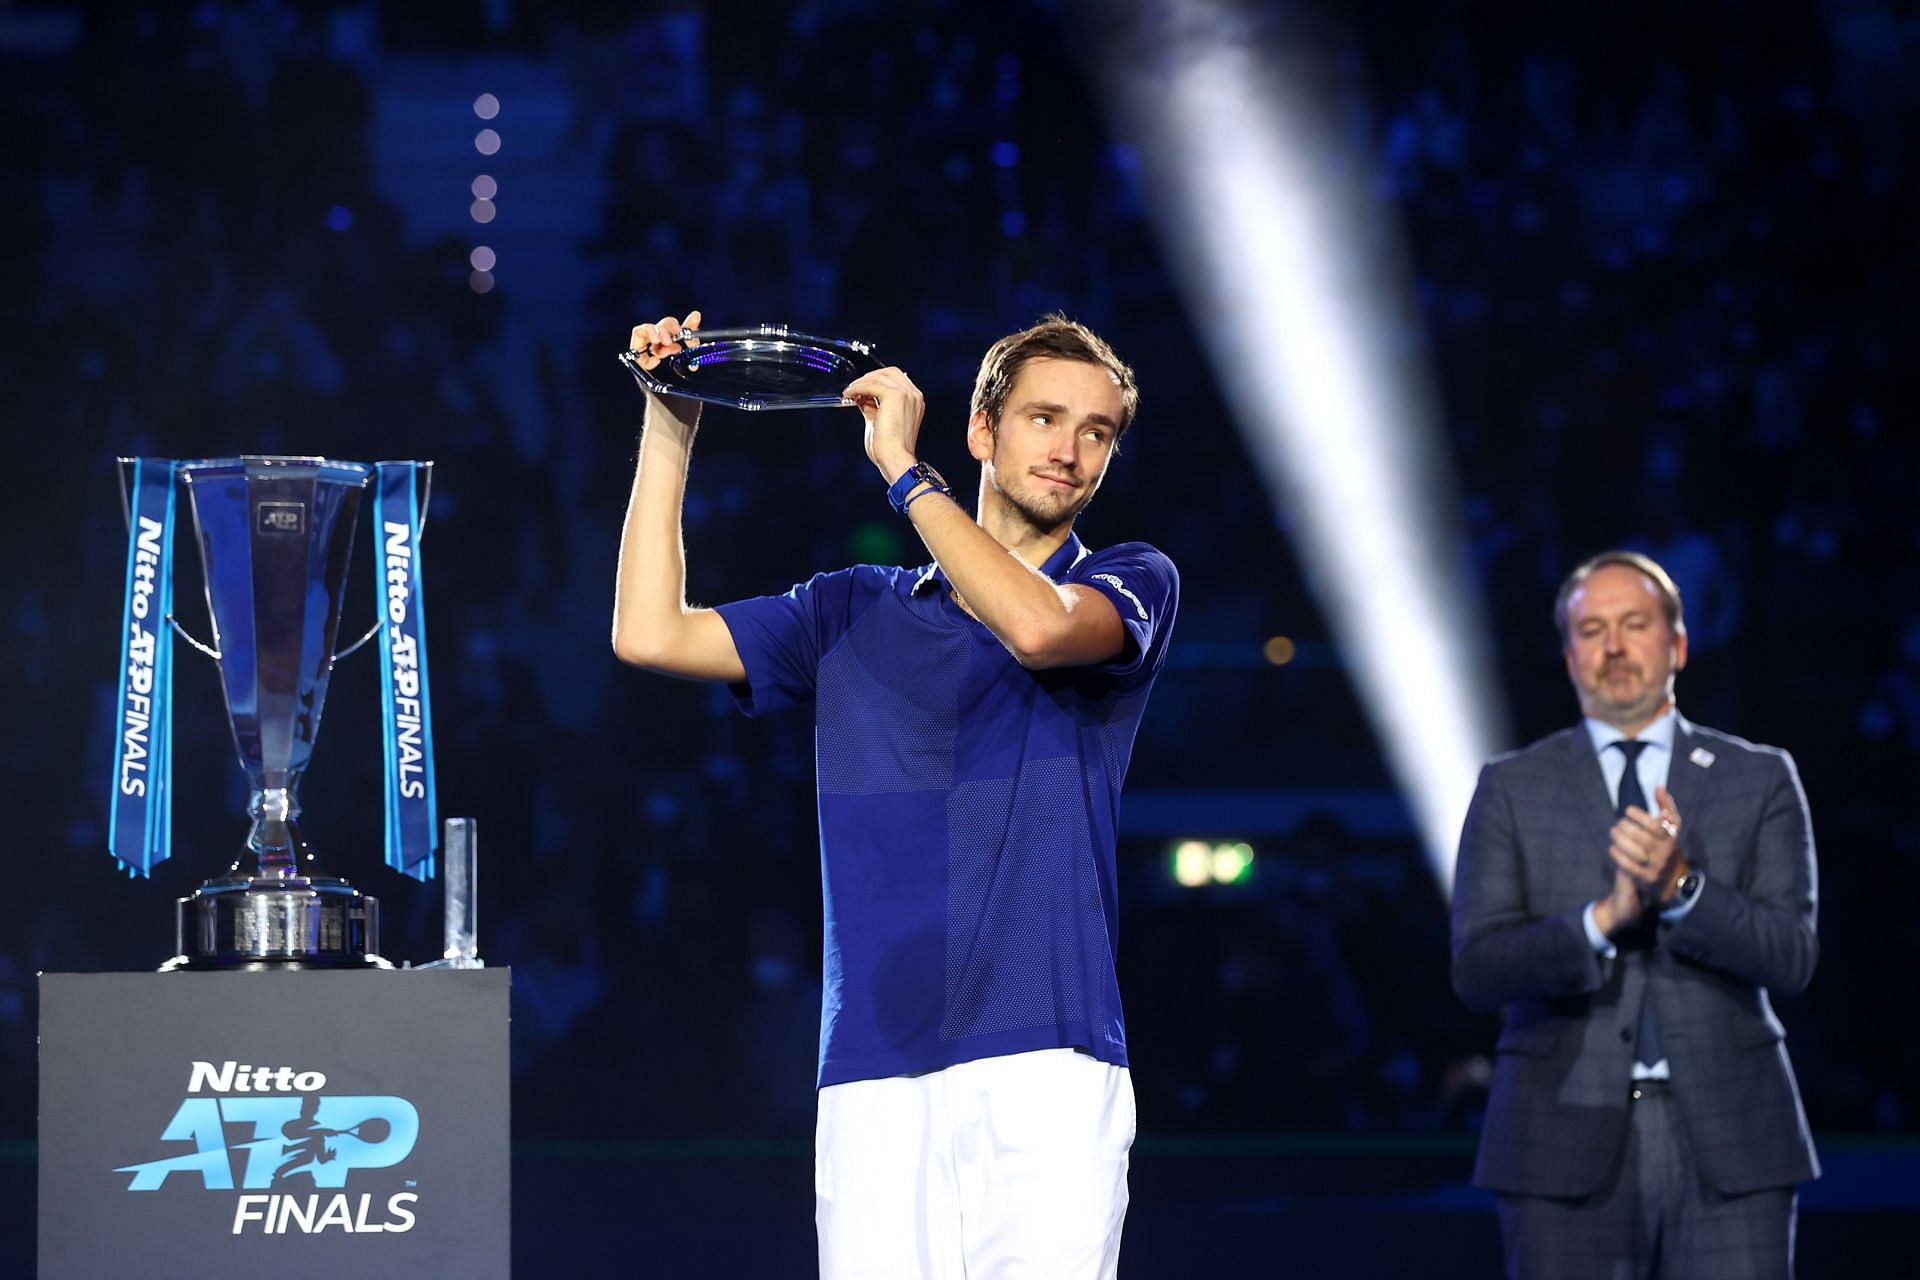 Daniil Medvedev with the runner-up plate at the Nitto ATP World Tour Finals